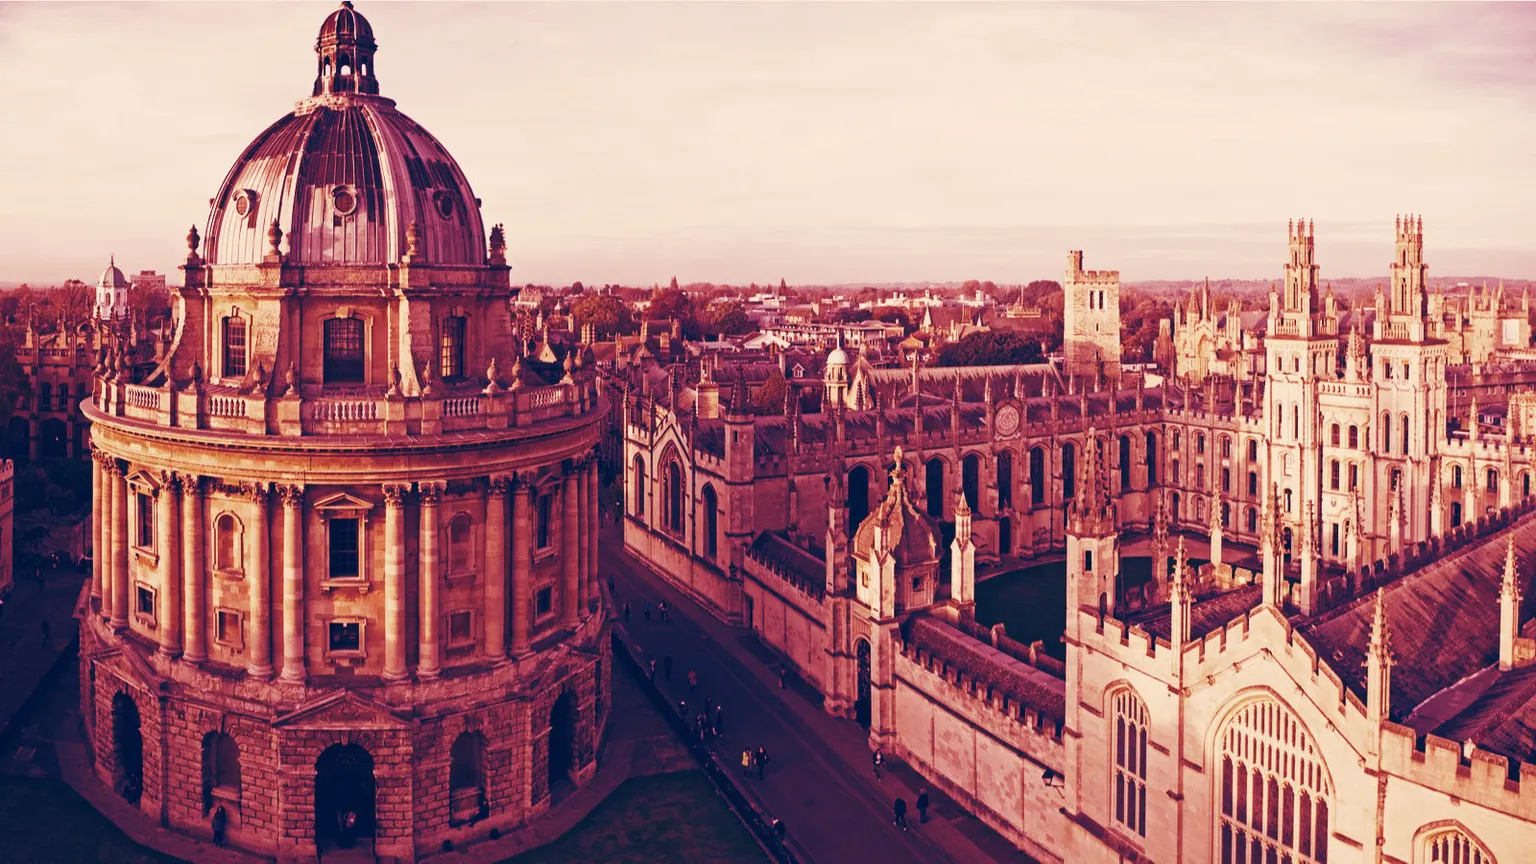 Radcliffe Camera and All Souls College, Oxford University. Image: Shutterstock